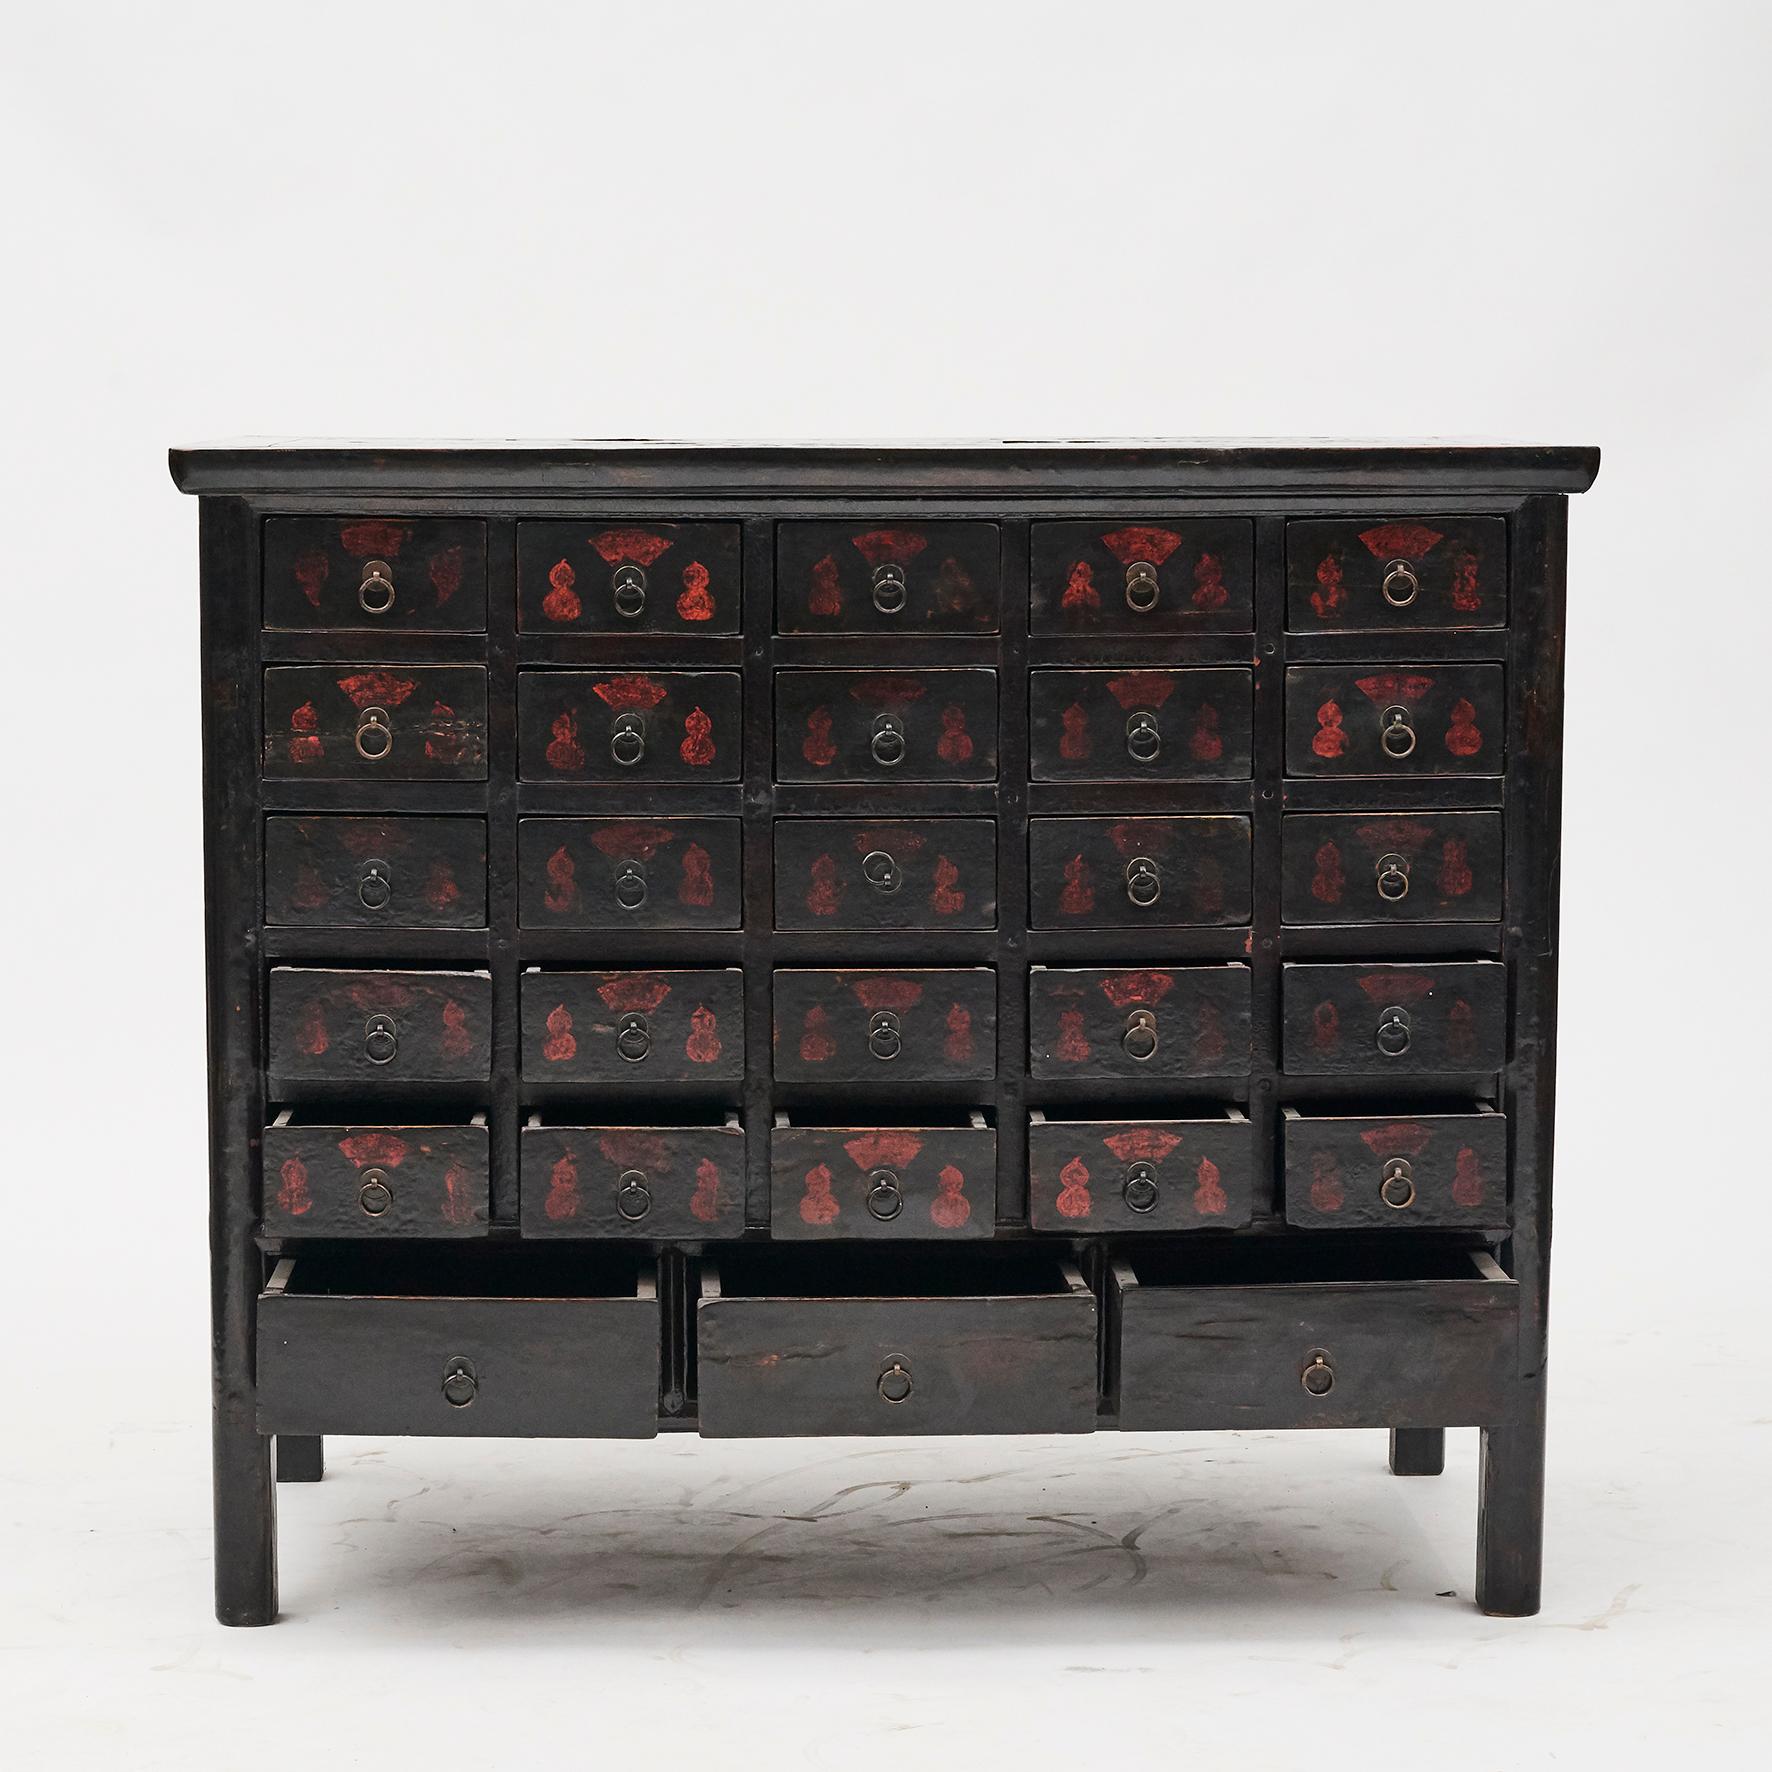 Beautiful Chinese apothecary medicine chest dating to circa 1820-1840 from the Shanxi province, China.

Original black / red lacquer with a natural patina highlighted by the light clear surface lacquer varnish.
28 drawers (25 small + 3 larger at